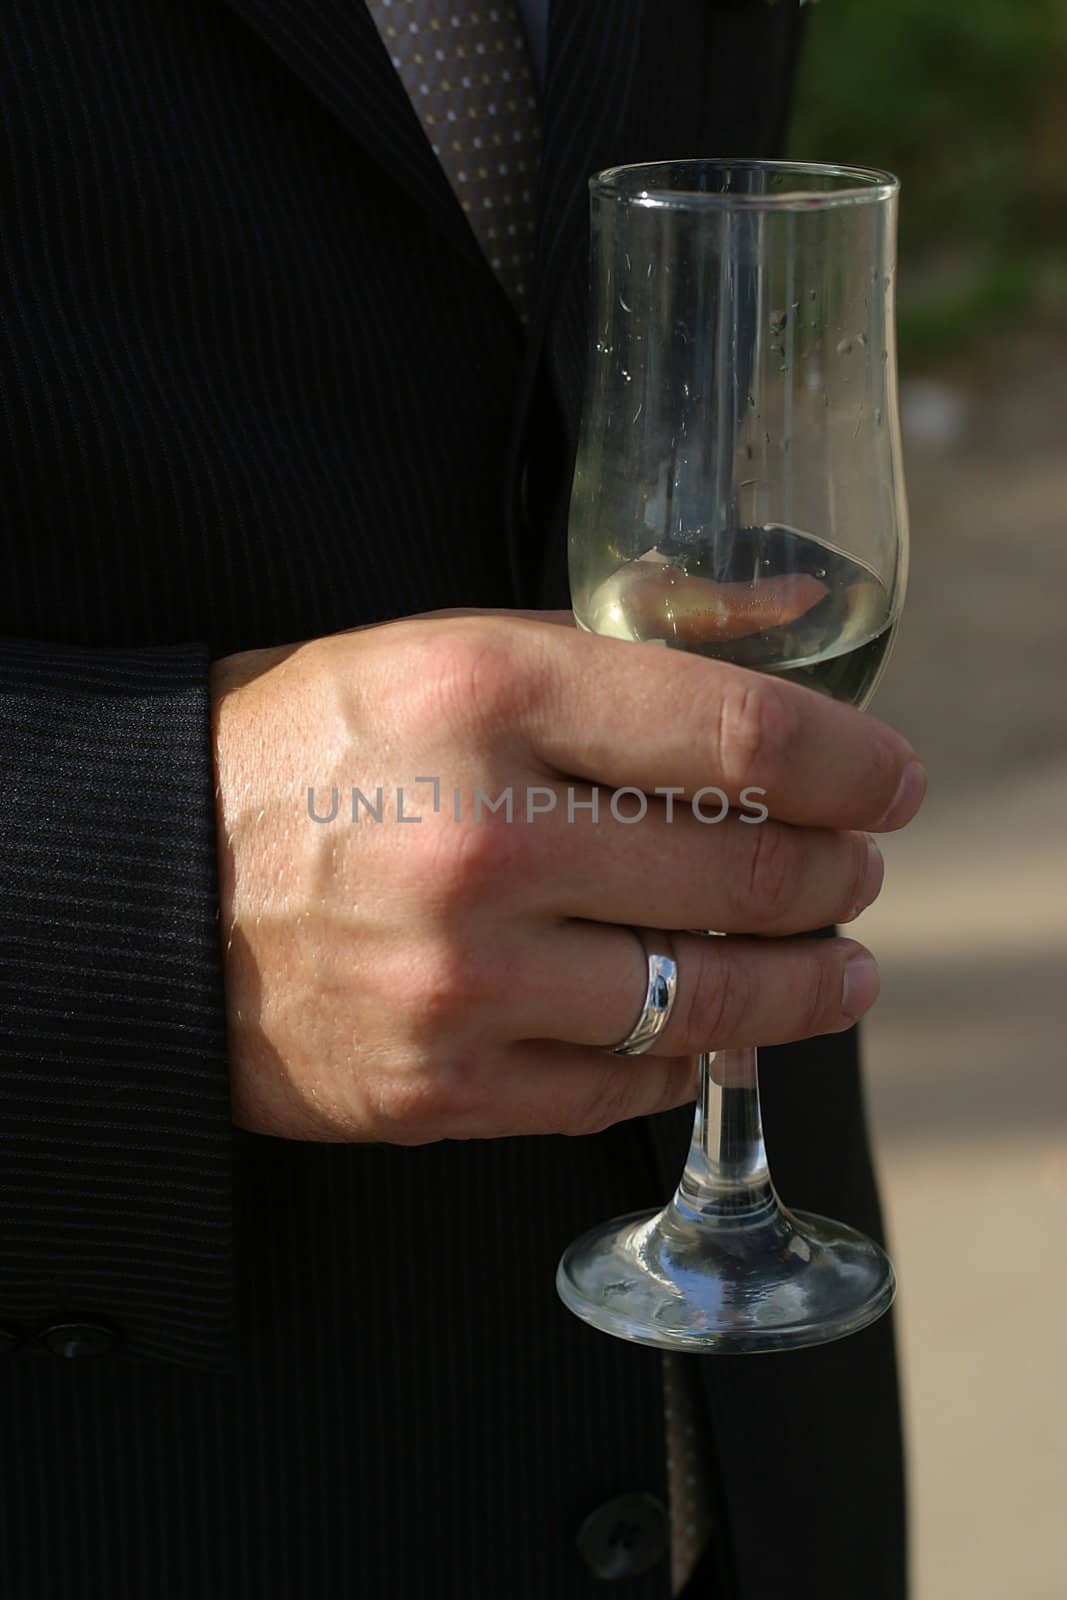 Glass of champagne in a hand of the groom